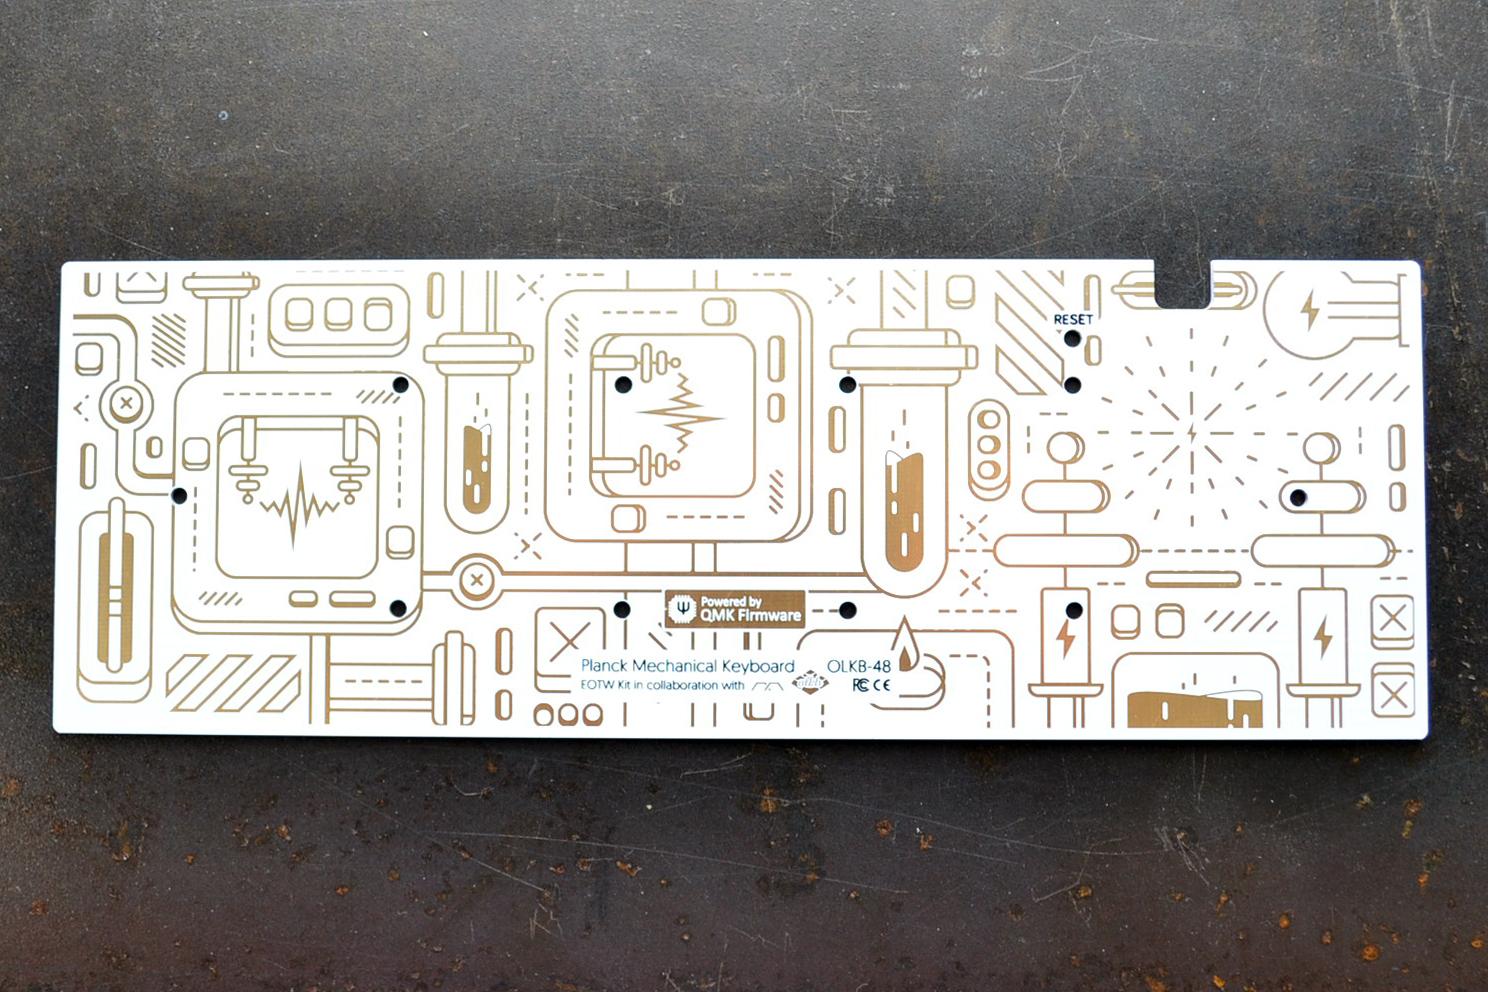 MK Planck EOTW  Sciencey Edition Top and Bottom Plates MKNFQC2KSV |0|